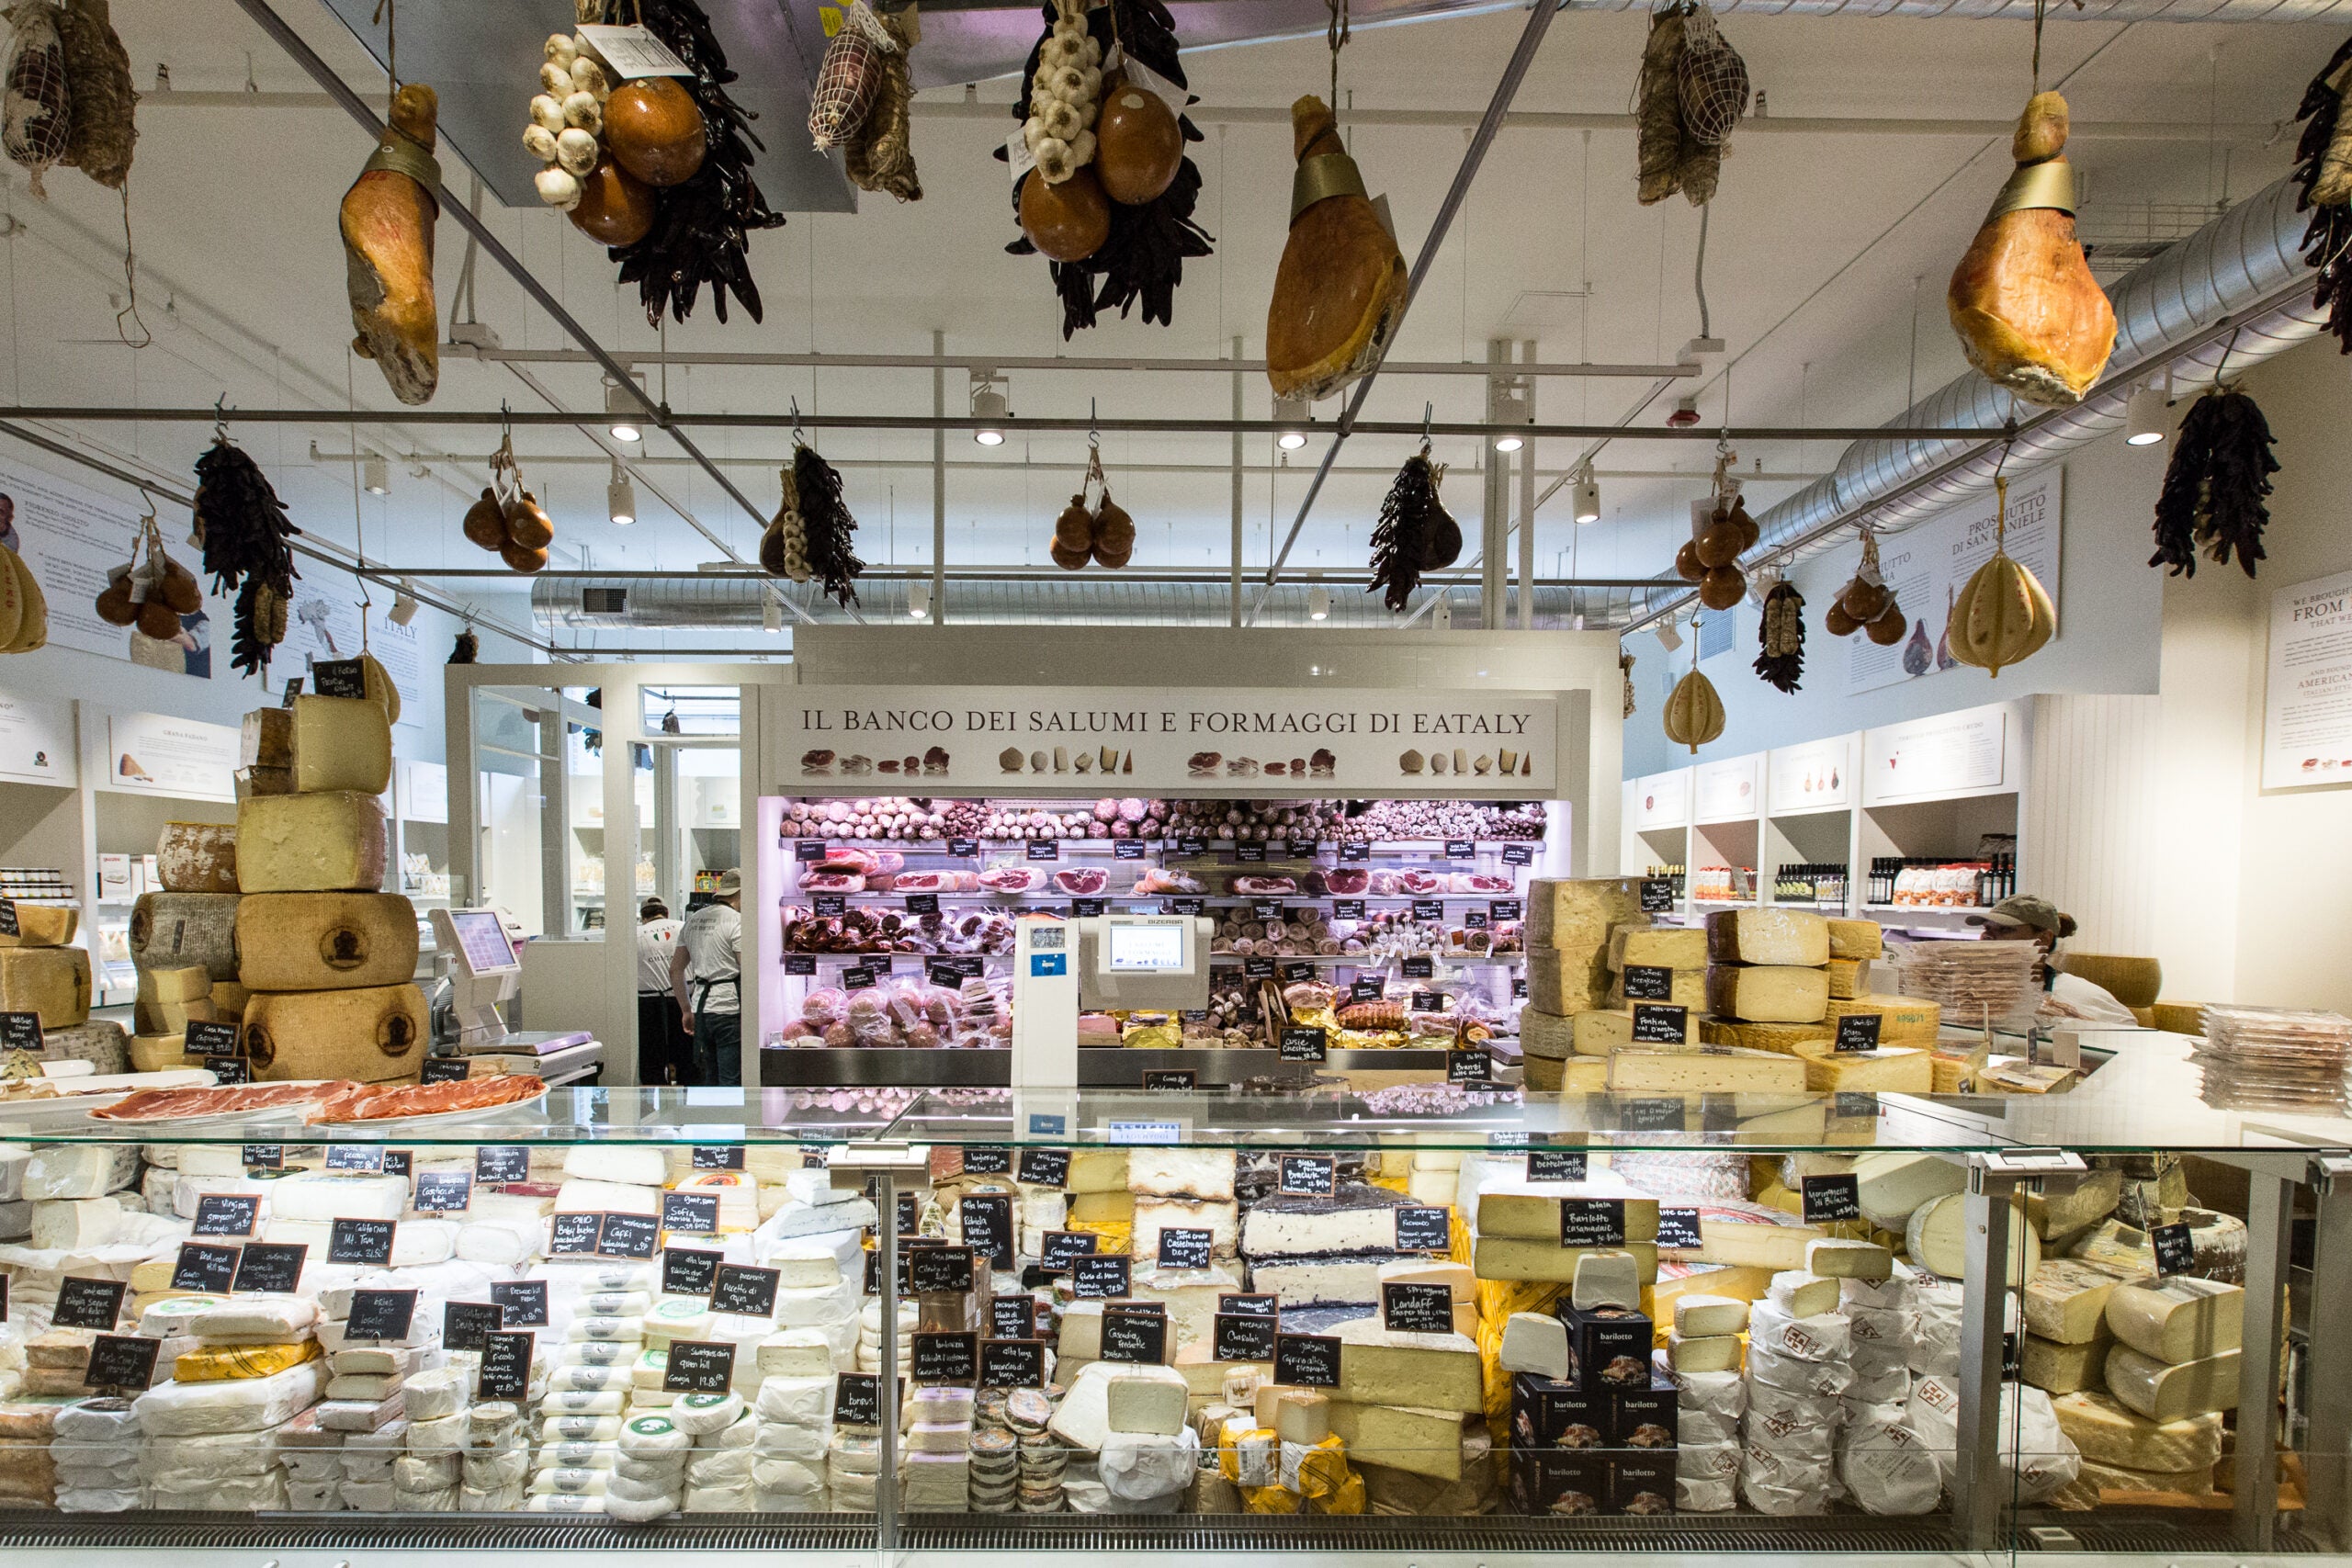 One of the shops at Eataly Chicago.